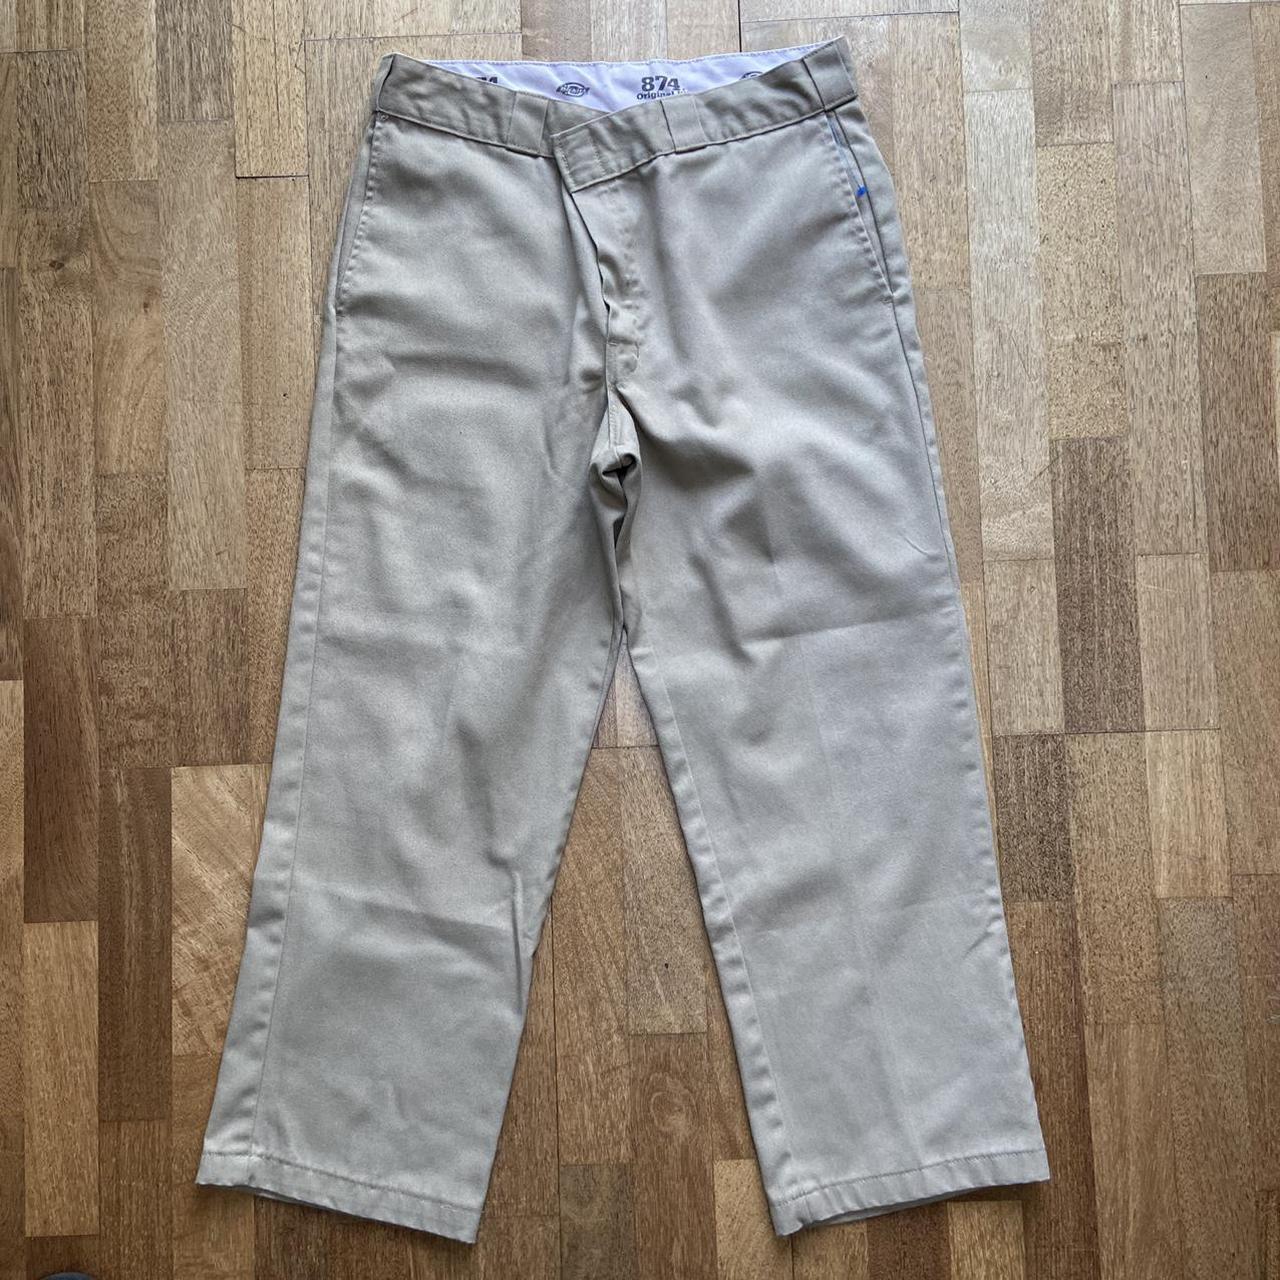 Product Image 1 - Vintage Dickies 874 trousers pants
Color